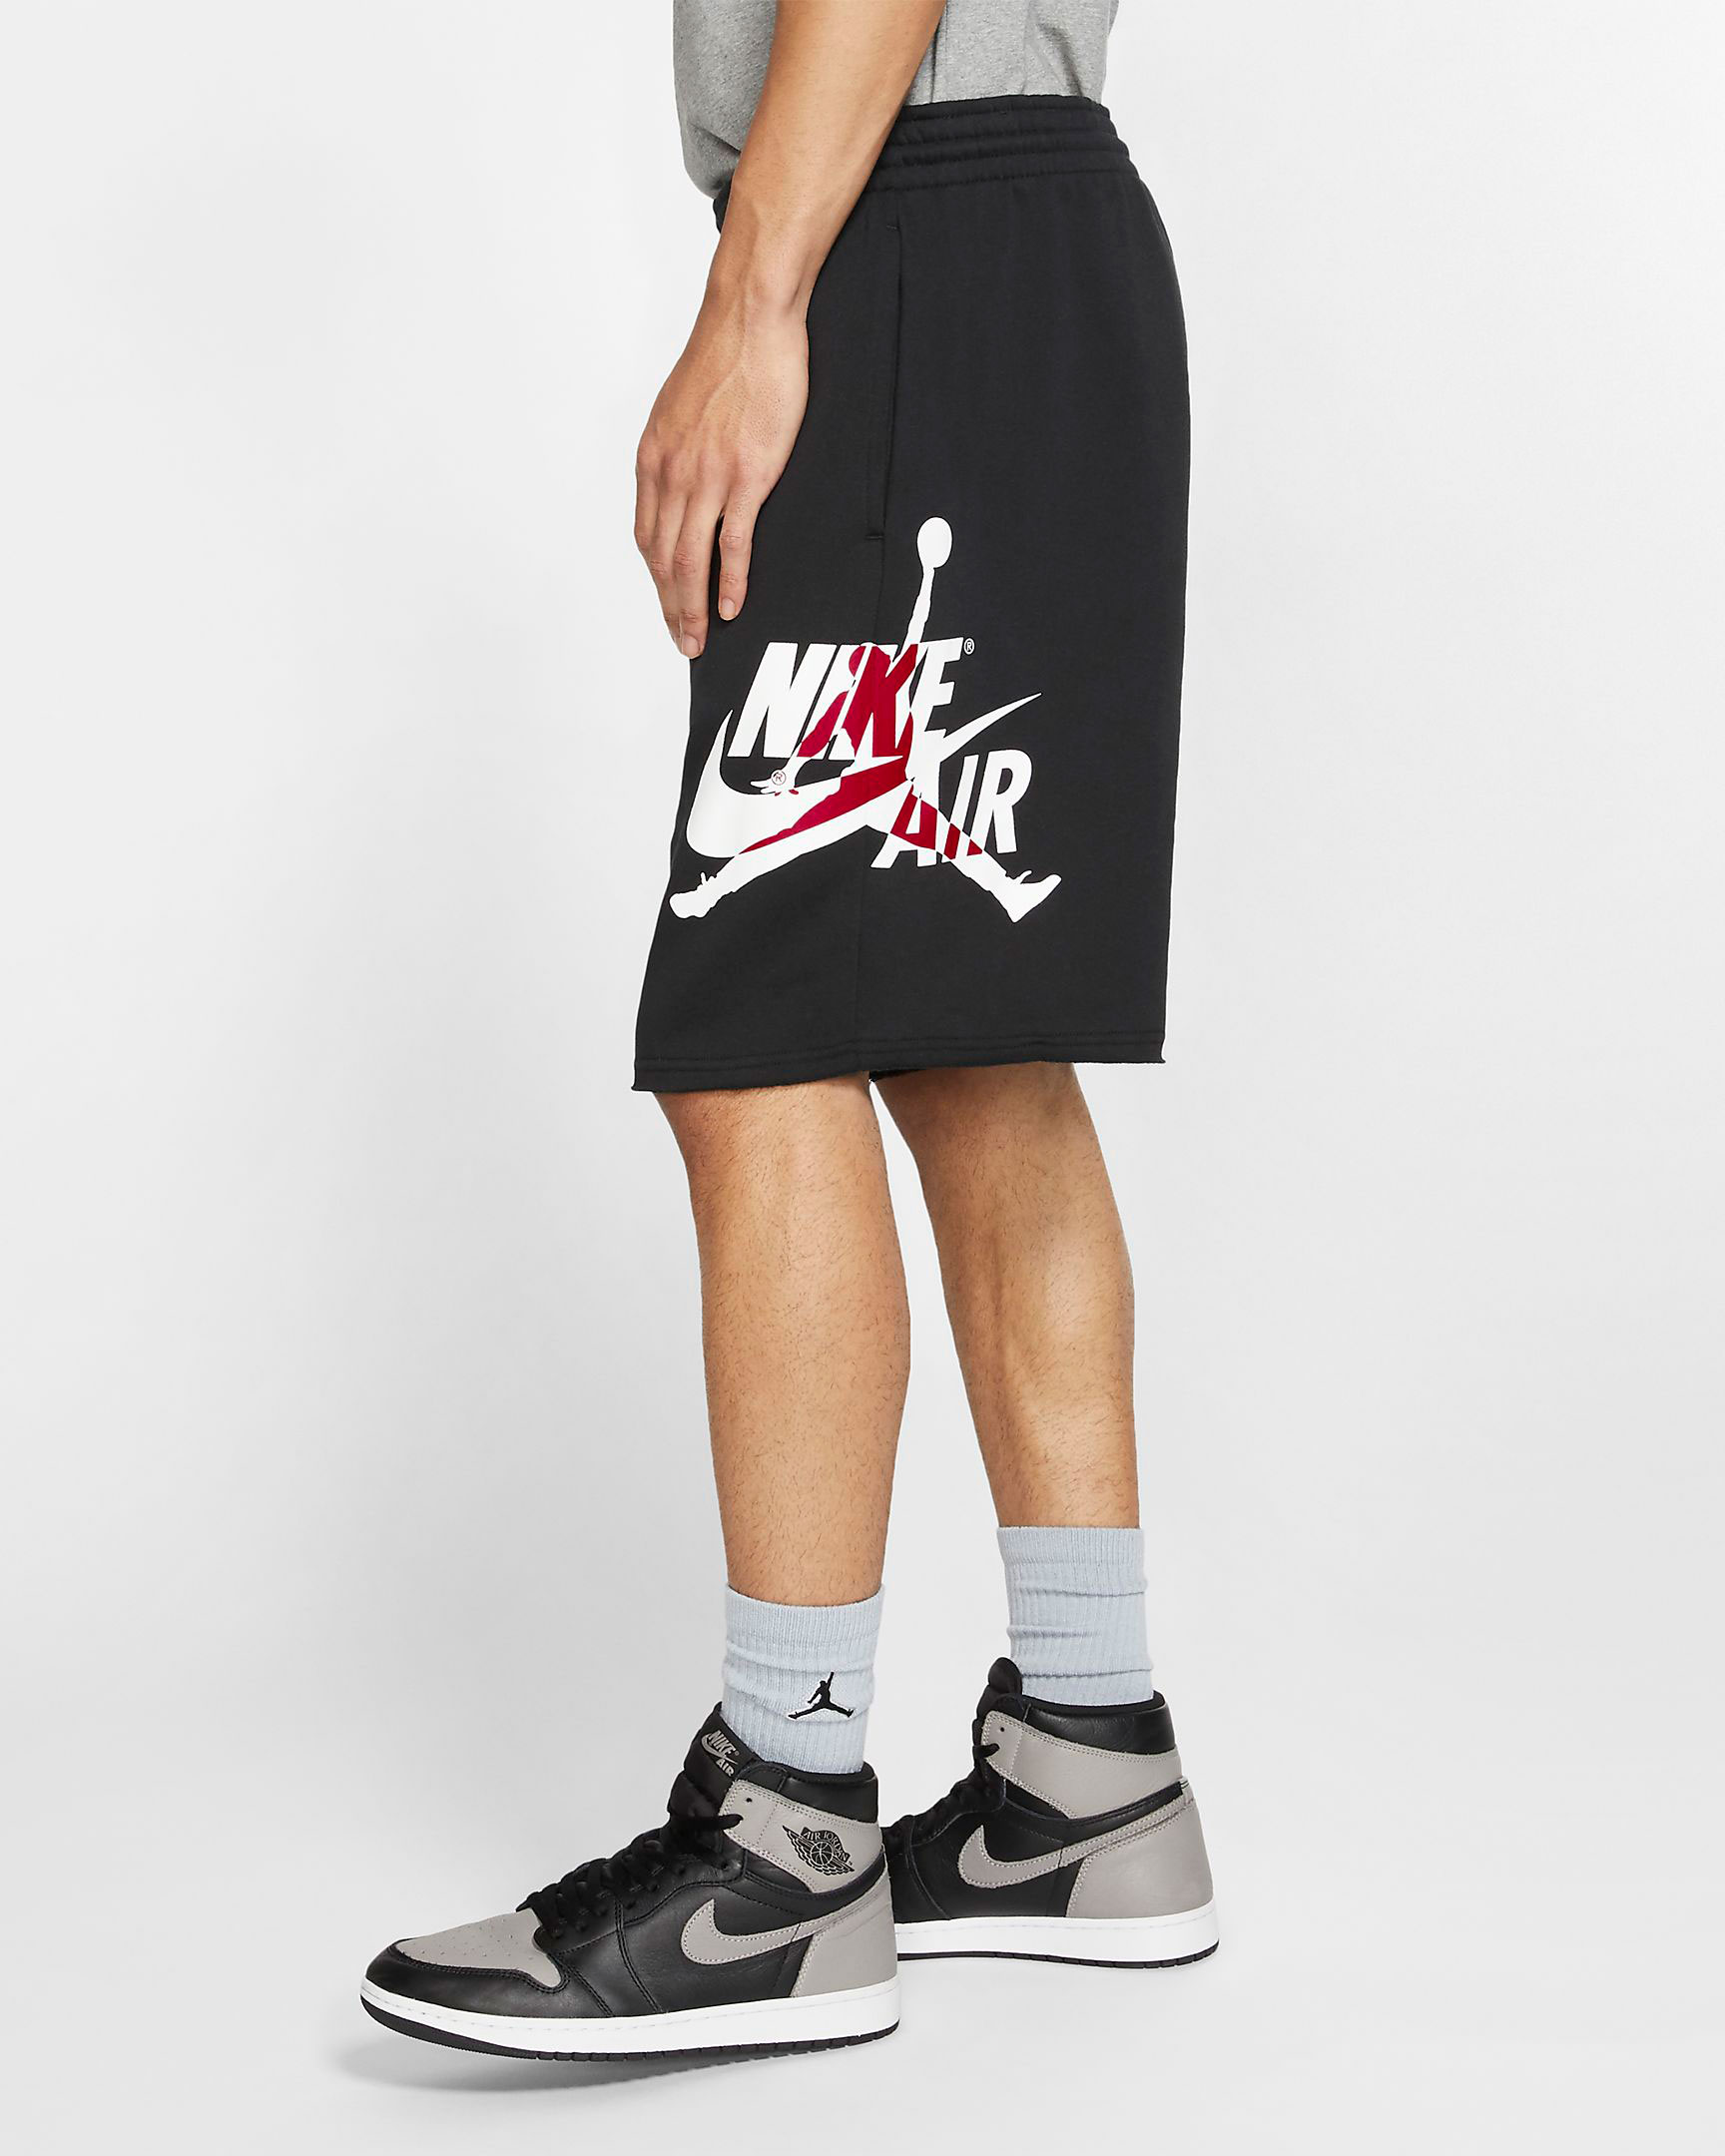 jordan one with shorts